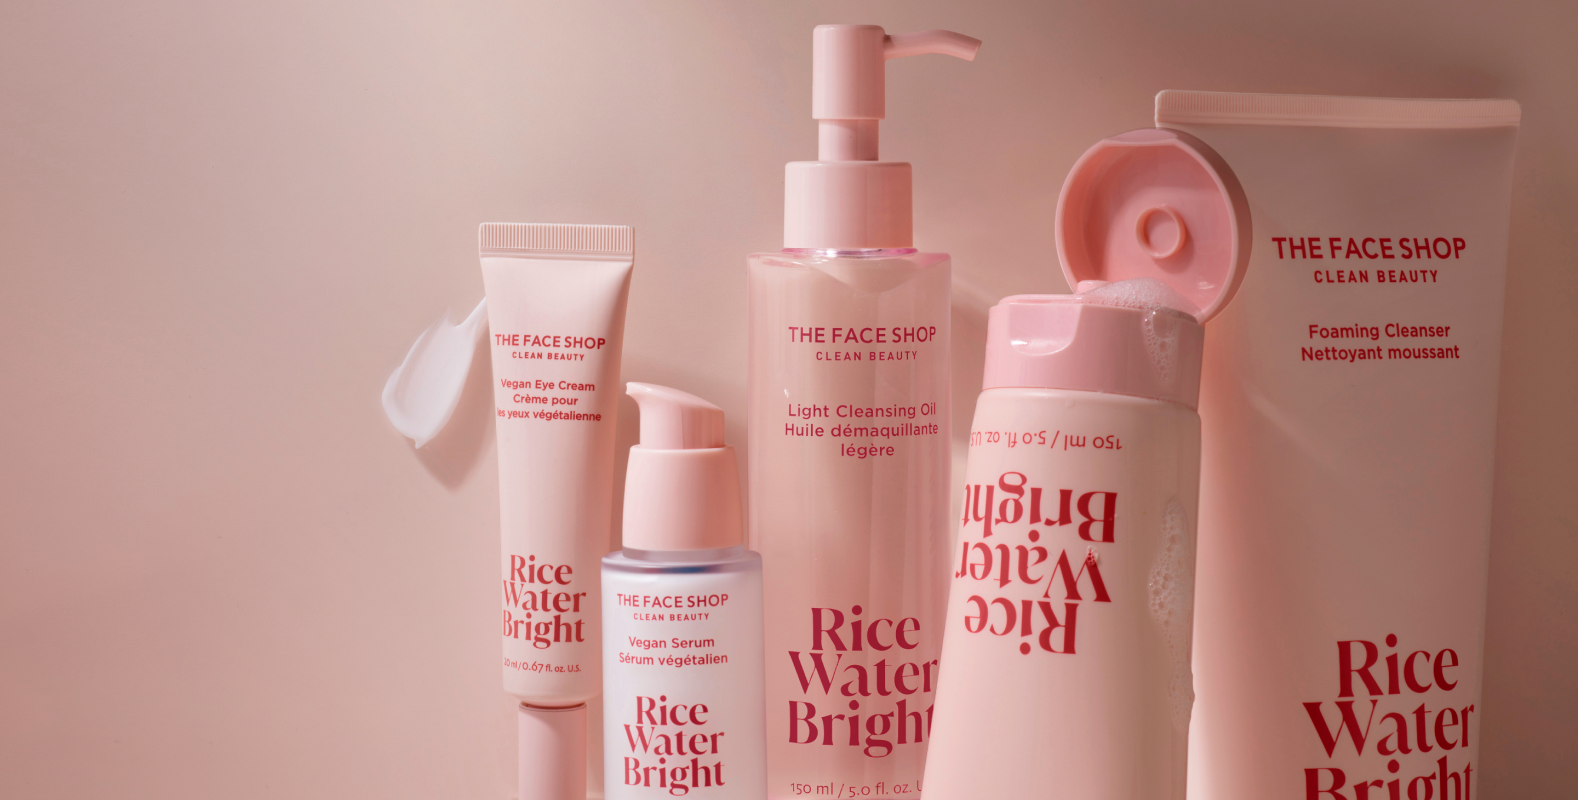 A wide banner portrait of the Rice Water Bright Collection, products leaning together and Foaming Cleanser covered in bubbles.